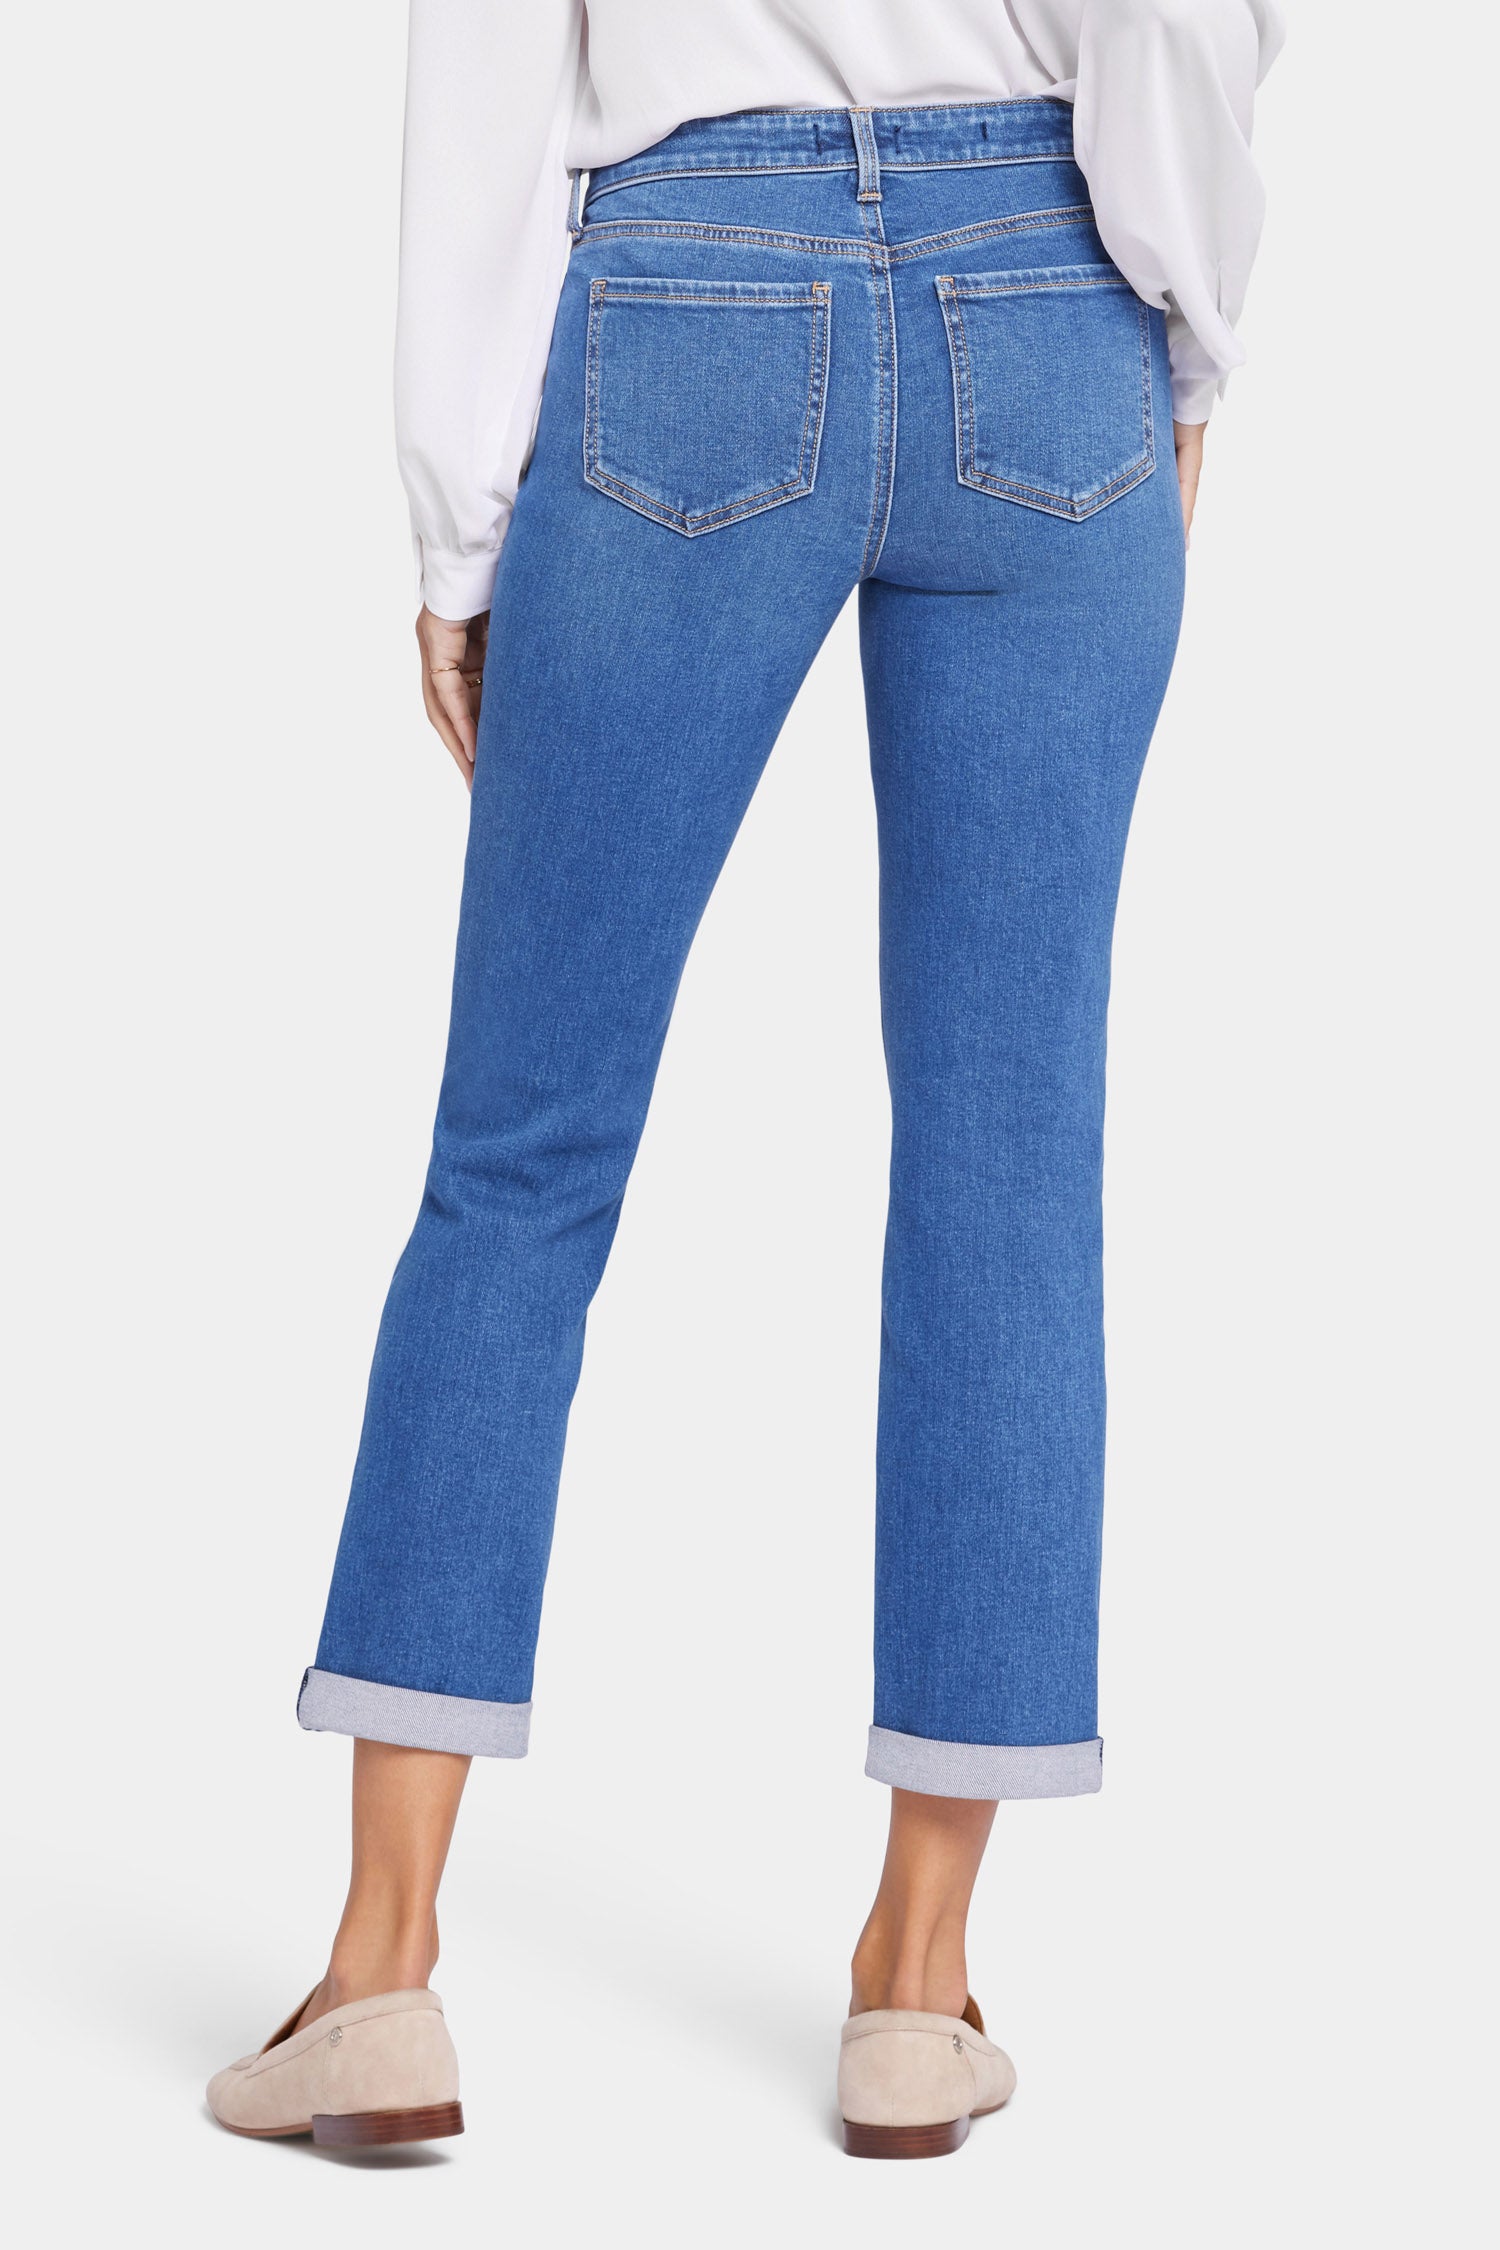 Sheri Slim Ankle Jeans In Petite With Roll Cuffs - Rockford Blue